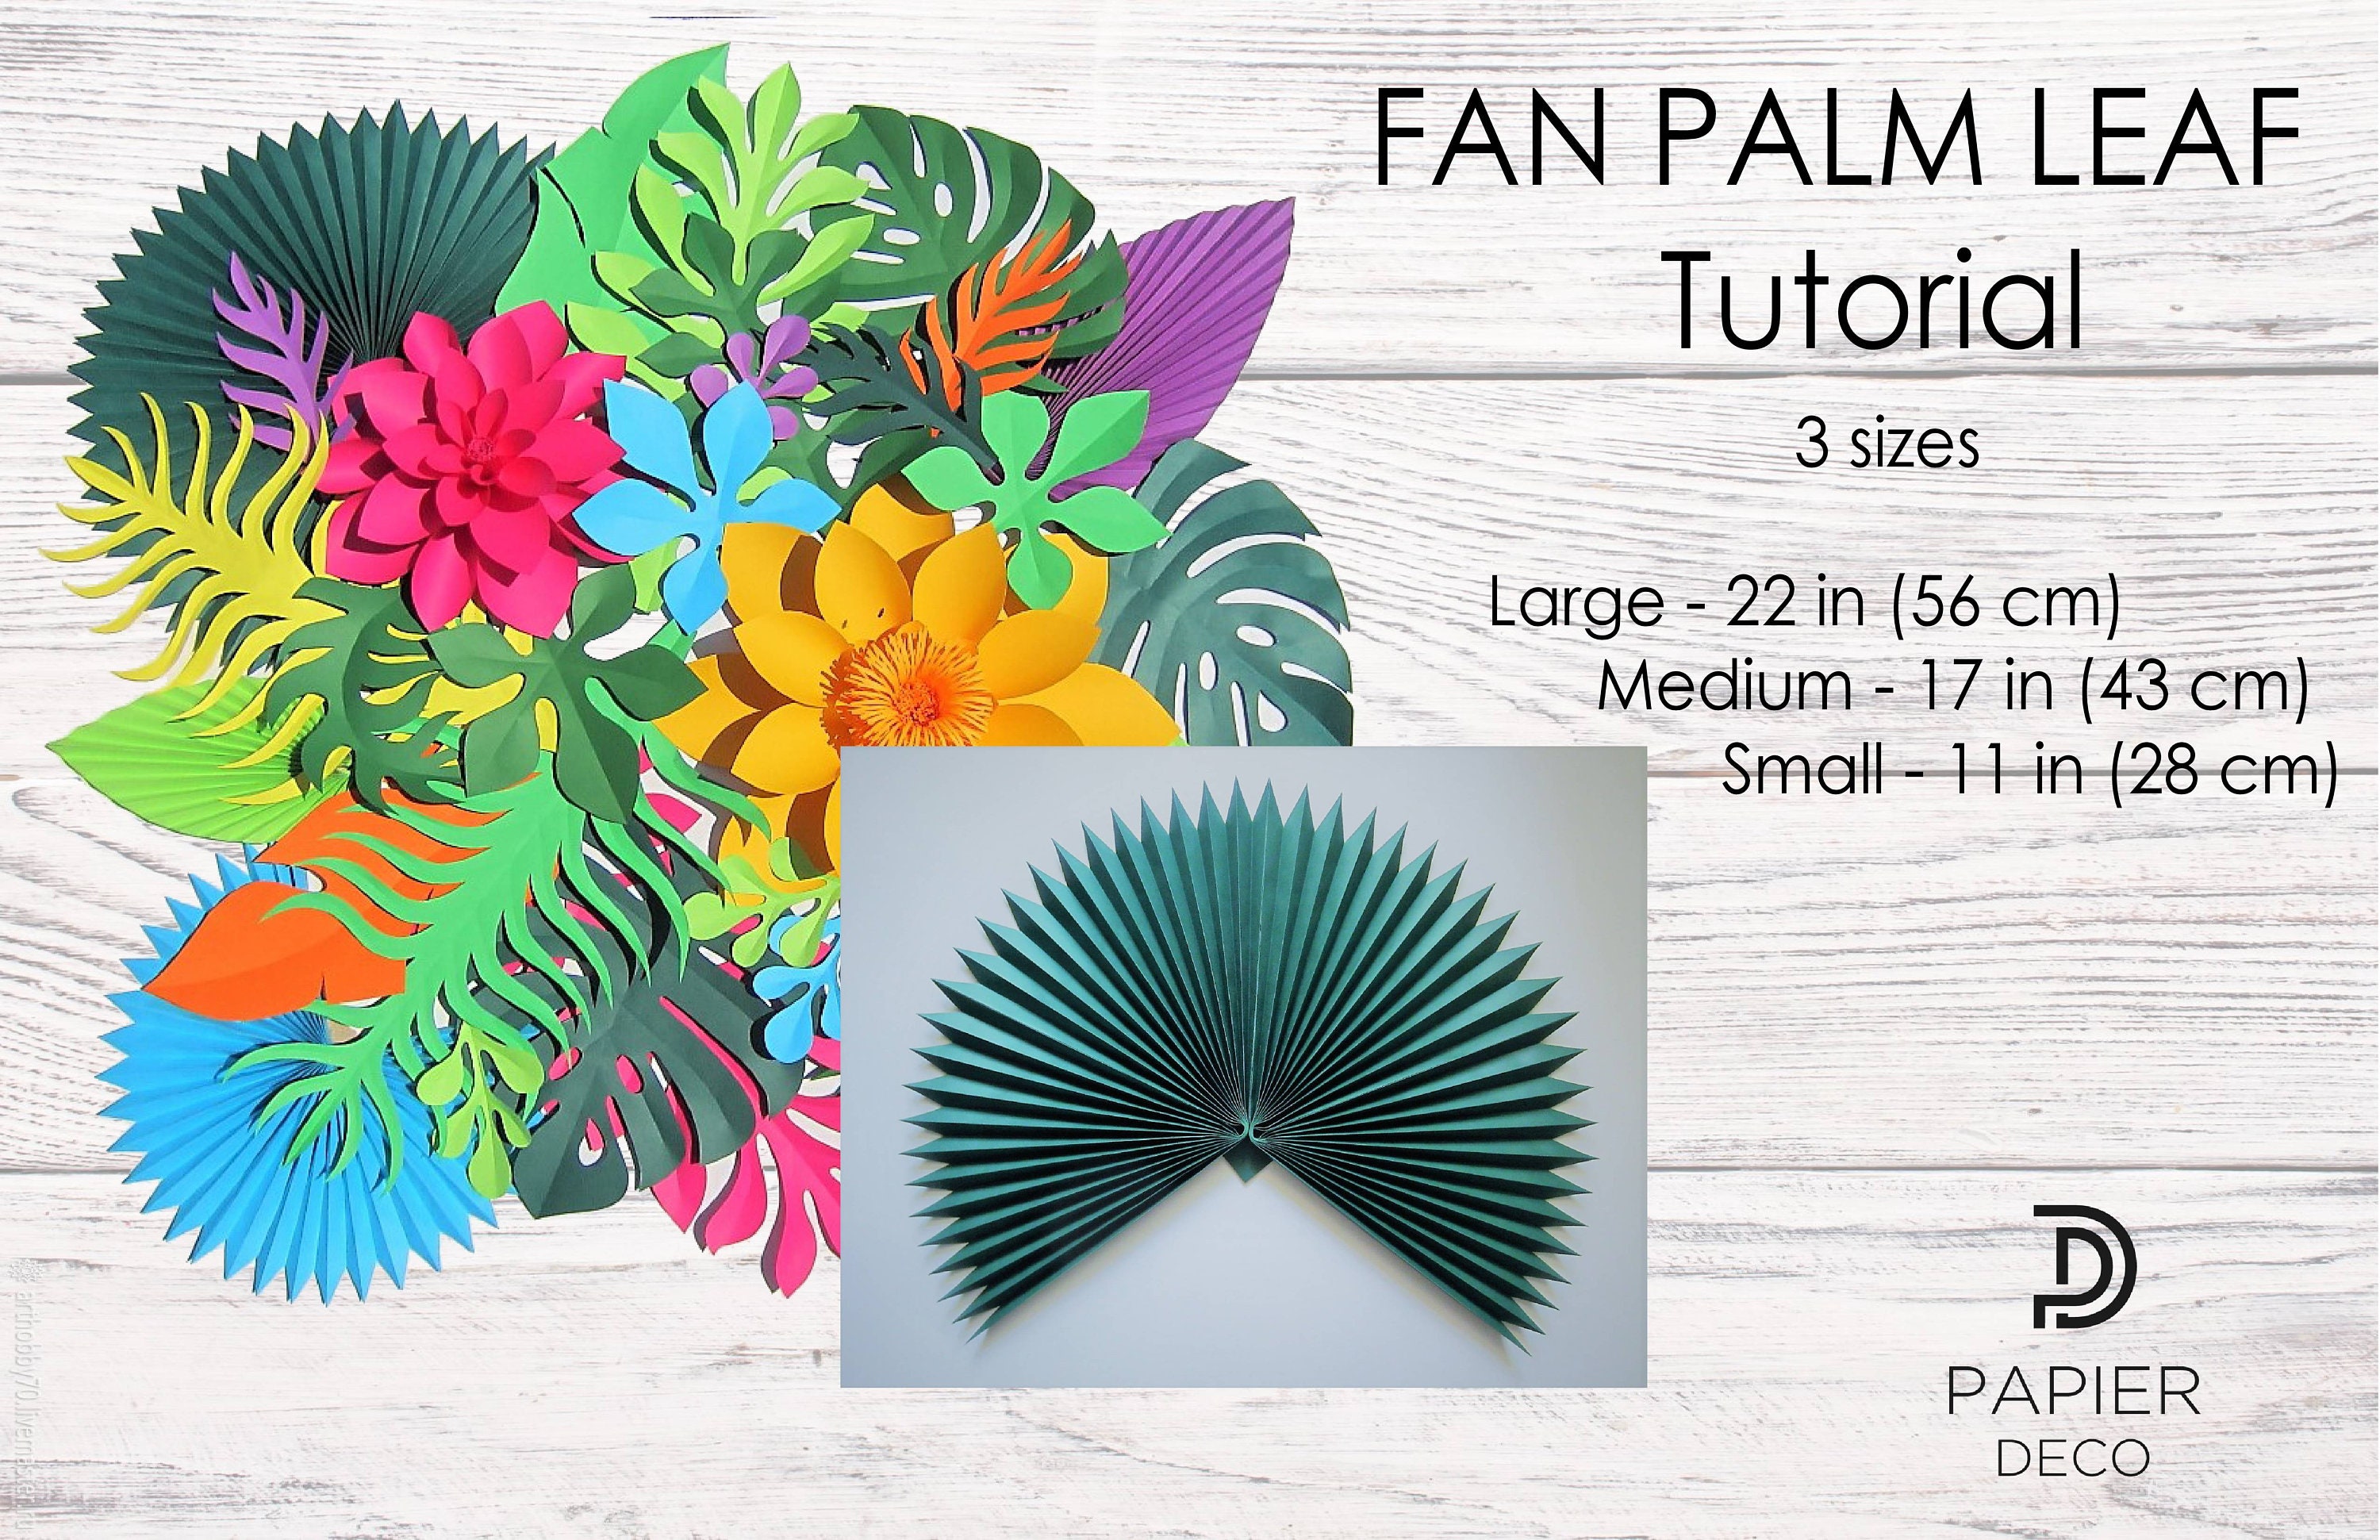 Easy paper fan decorations inspired by faux sun palm leaves - Cuckoo4Design